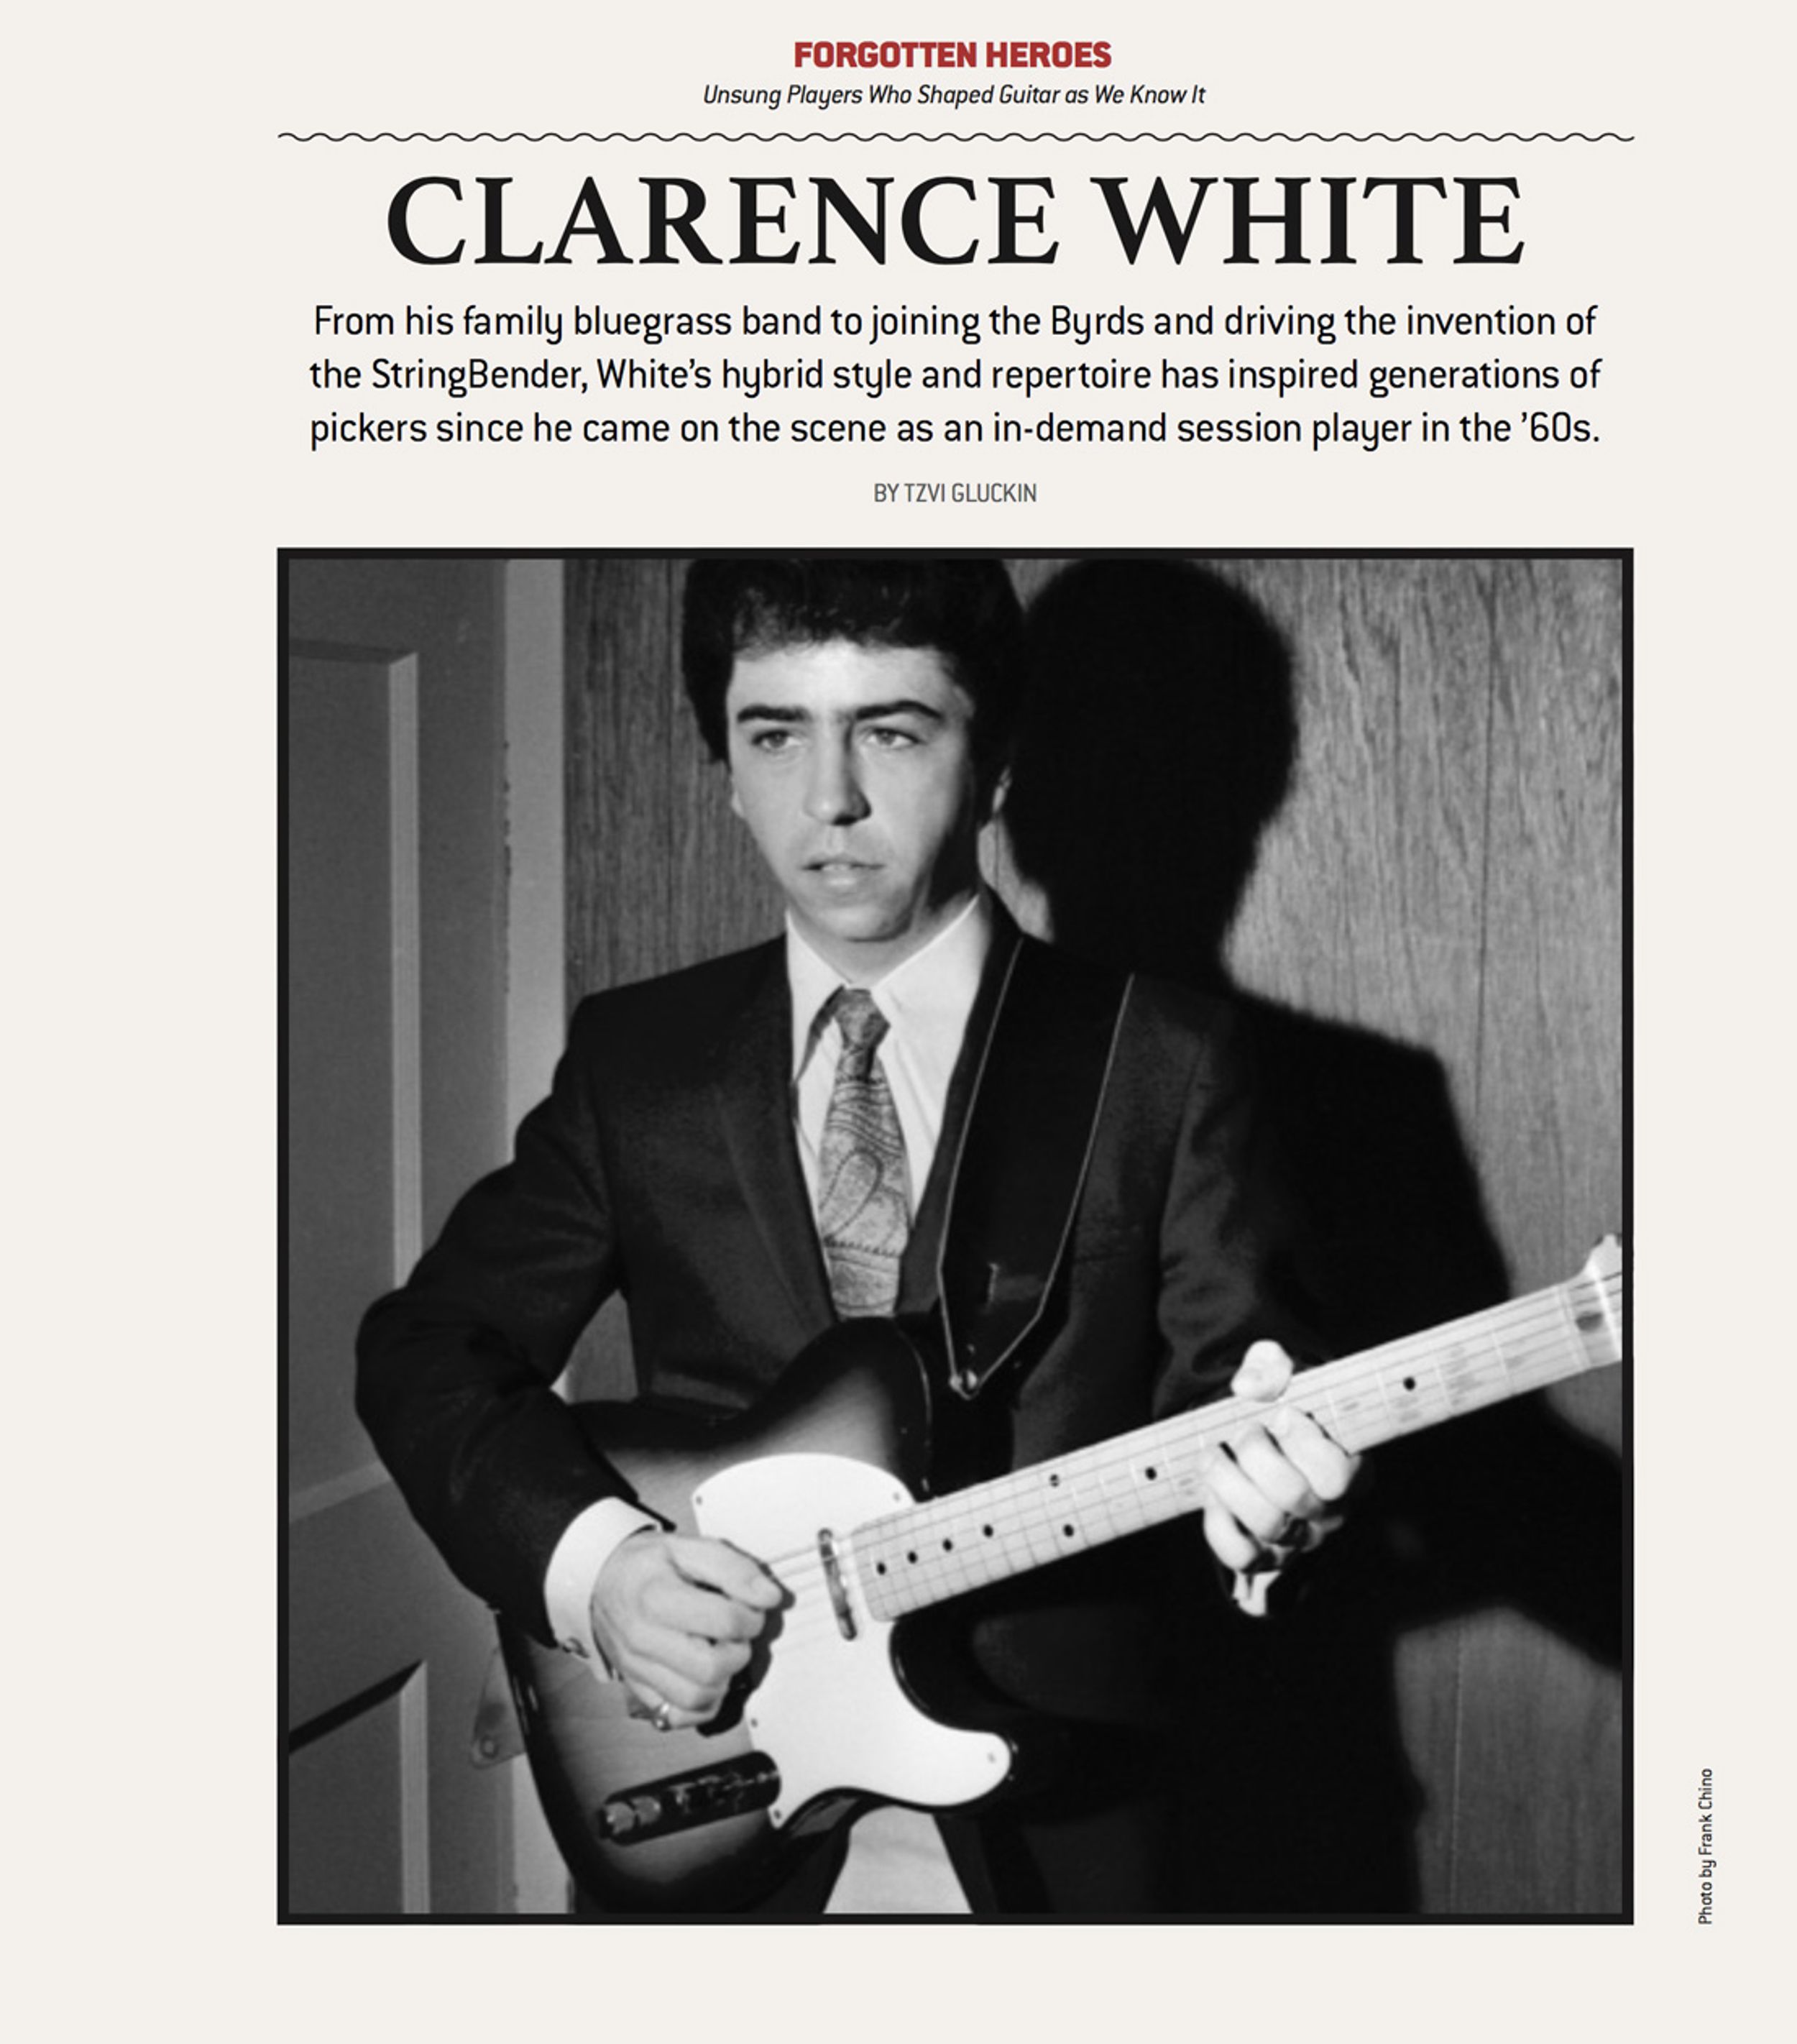 Forgotten Heroes: Clarence White